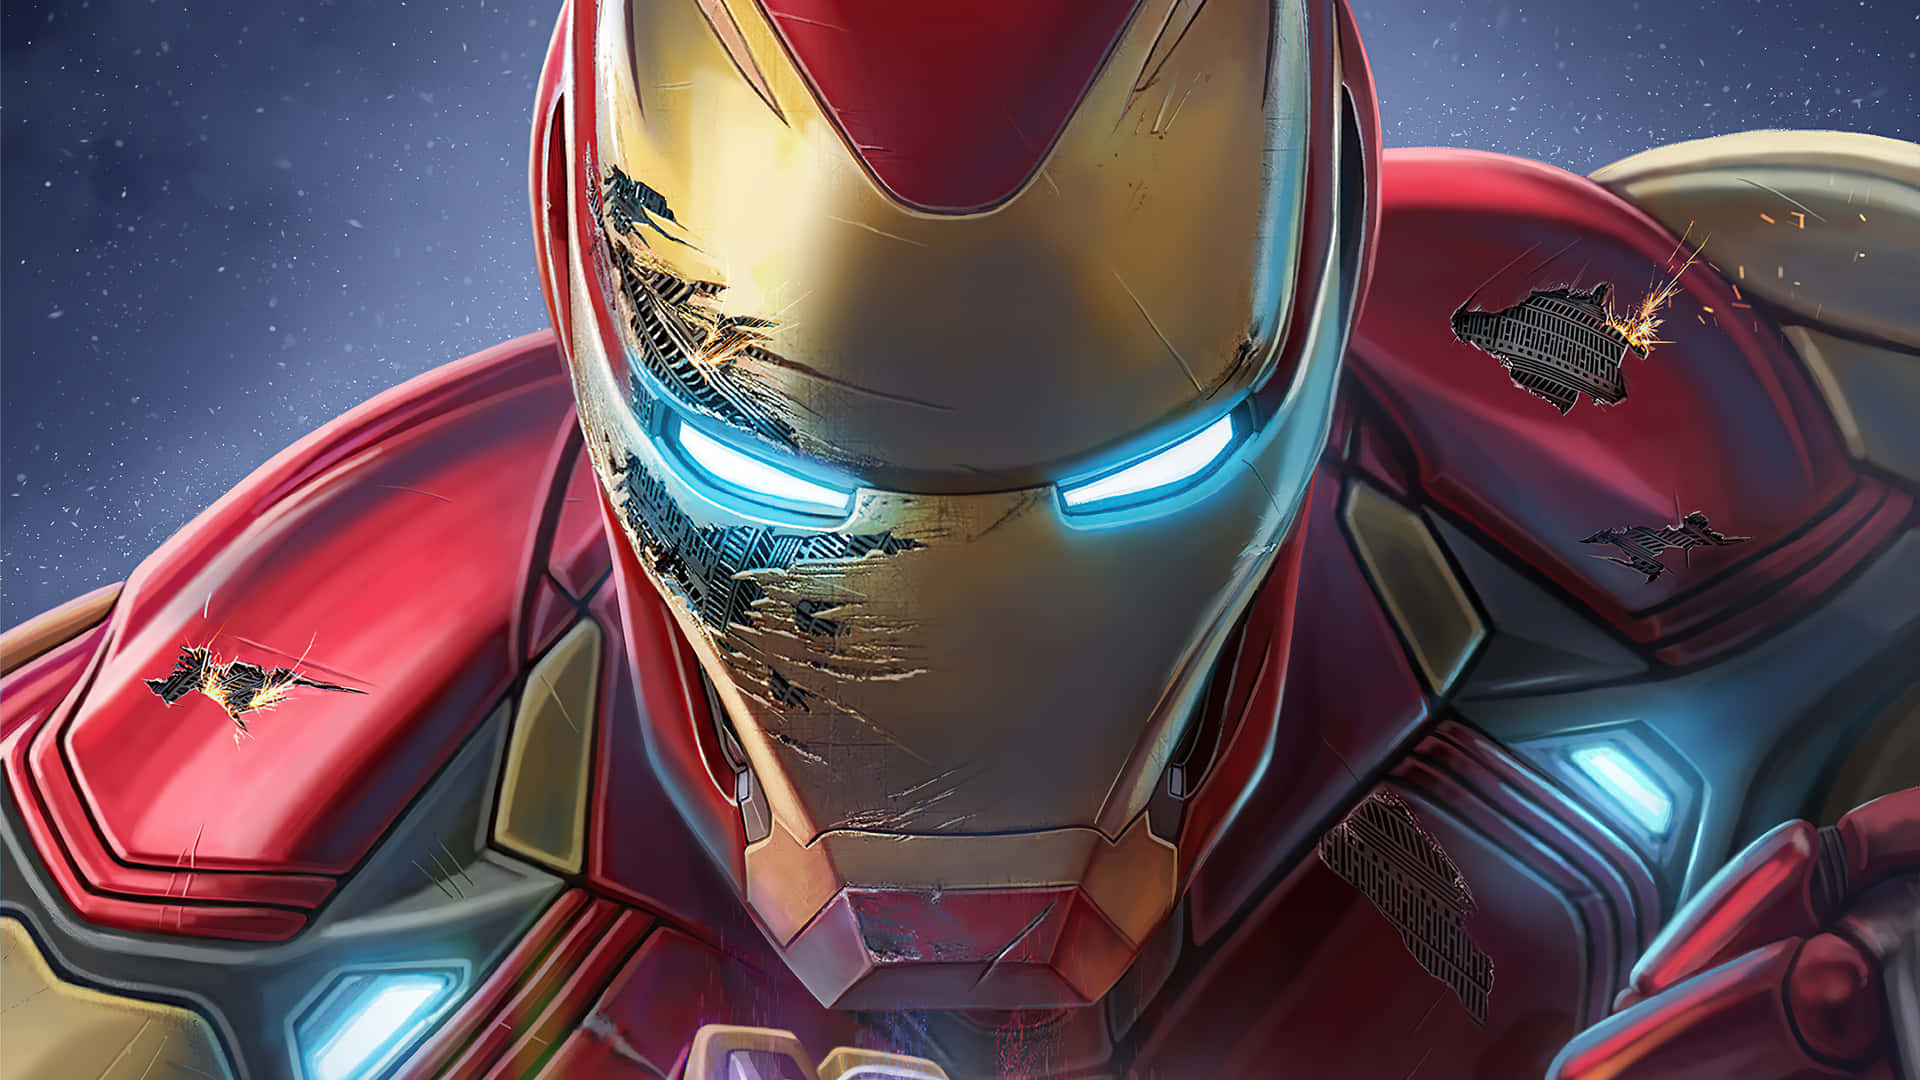 Iron Man Digital Art With Scratched Helmet Picture